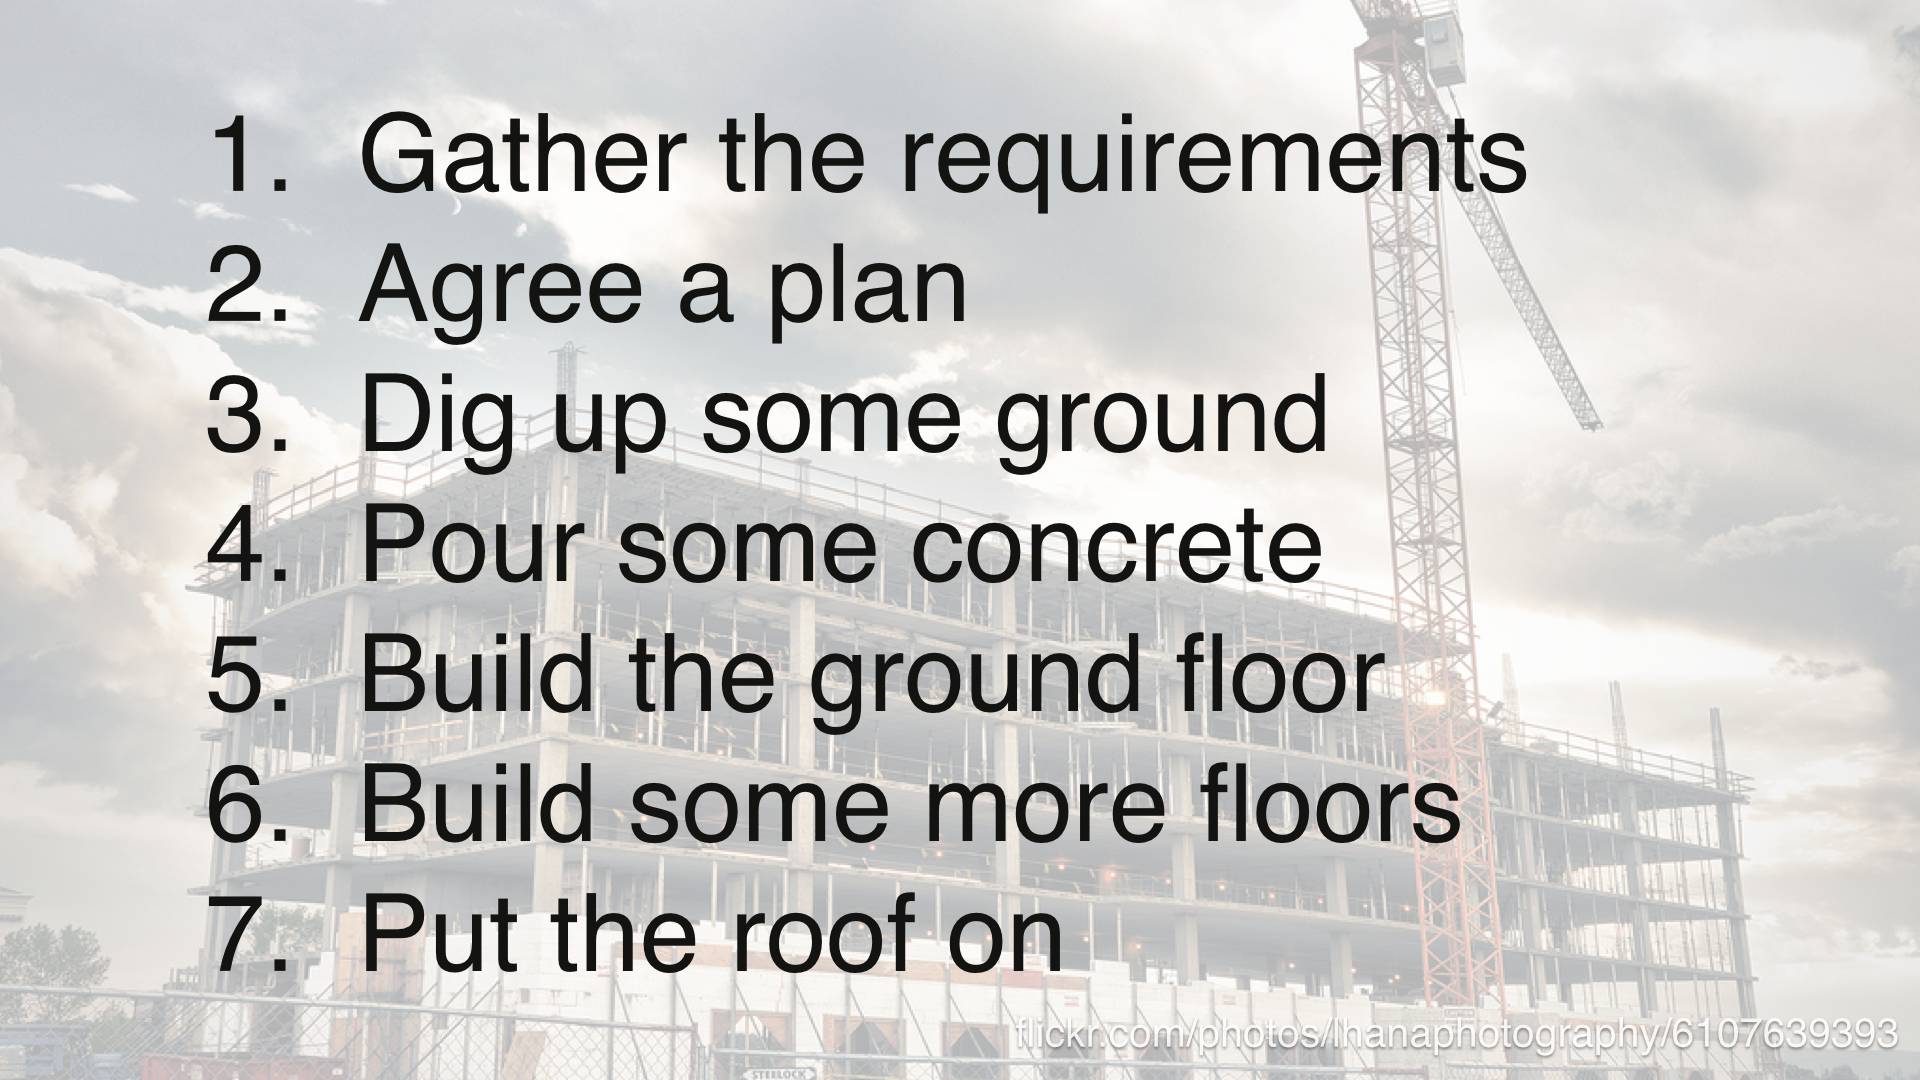 1. gather the requirements. 2. agree a plan. 3. dig up some ground. 4. pour some concrete. 5. build the ground floor. 6. build some more floors. 7. put the roof on